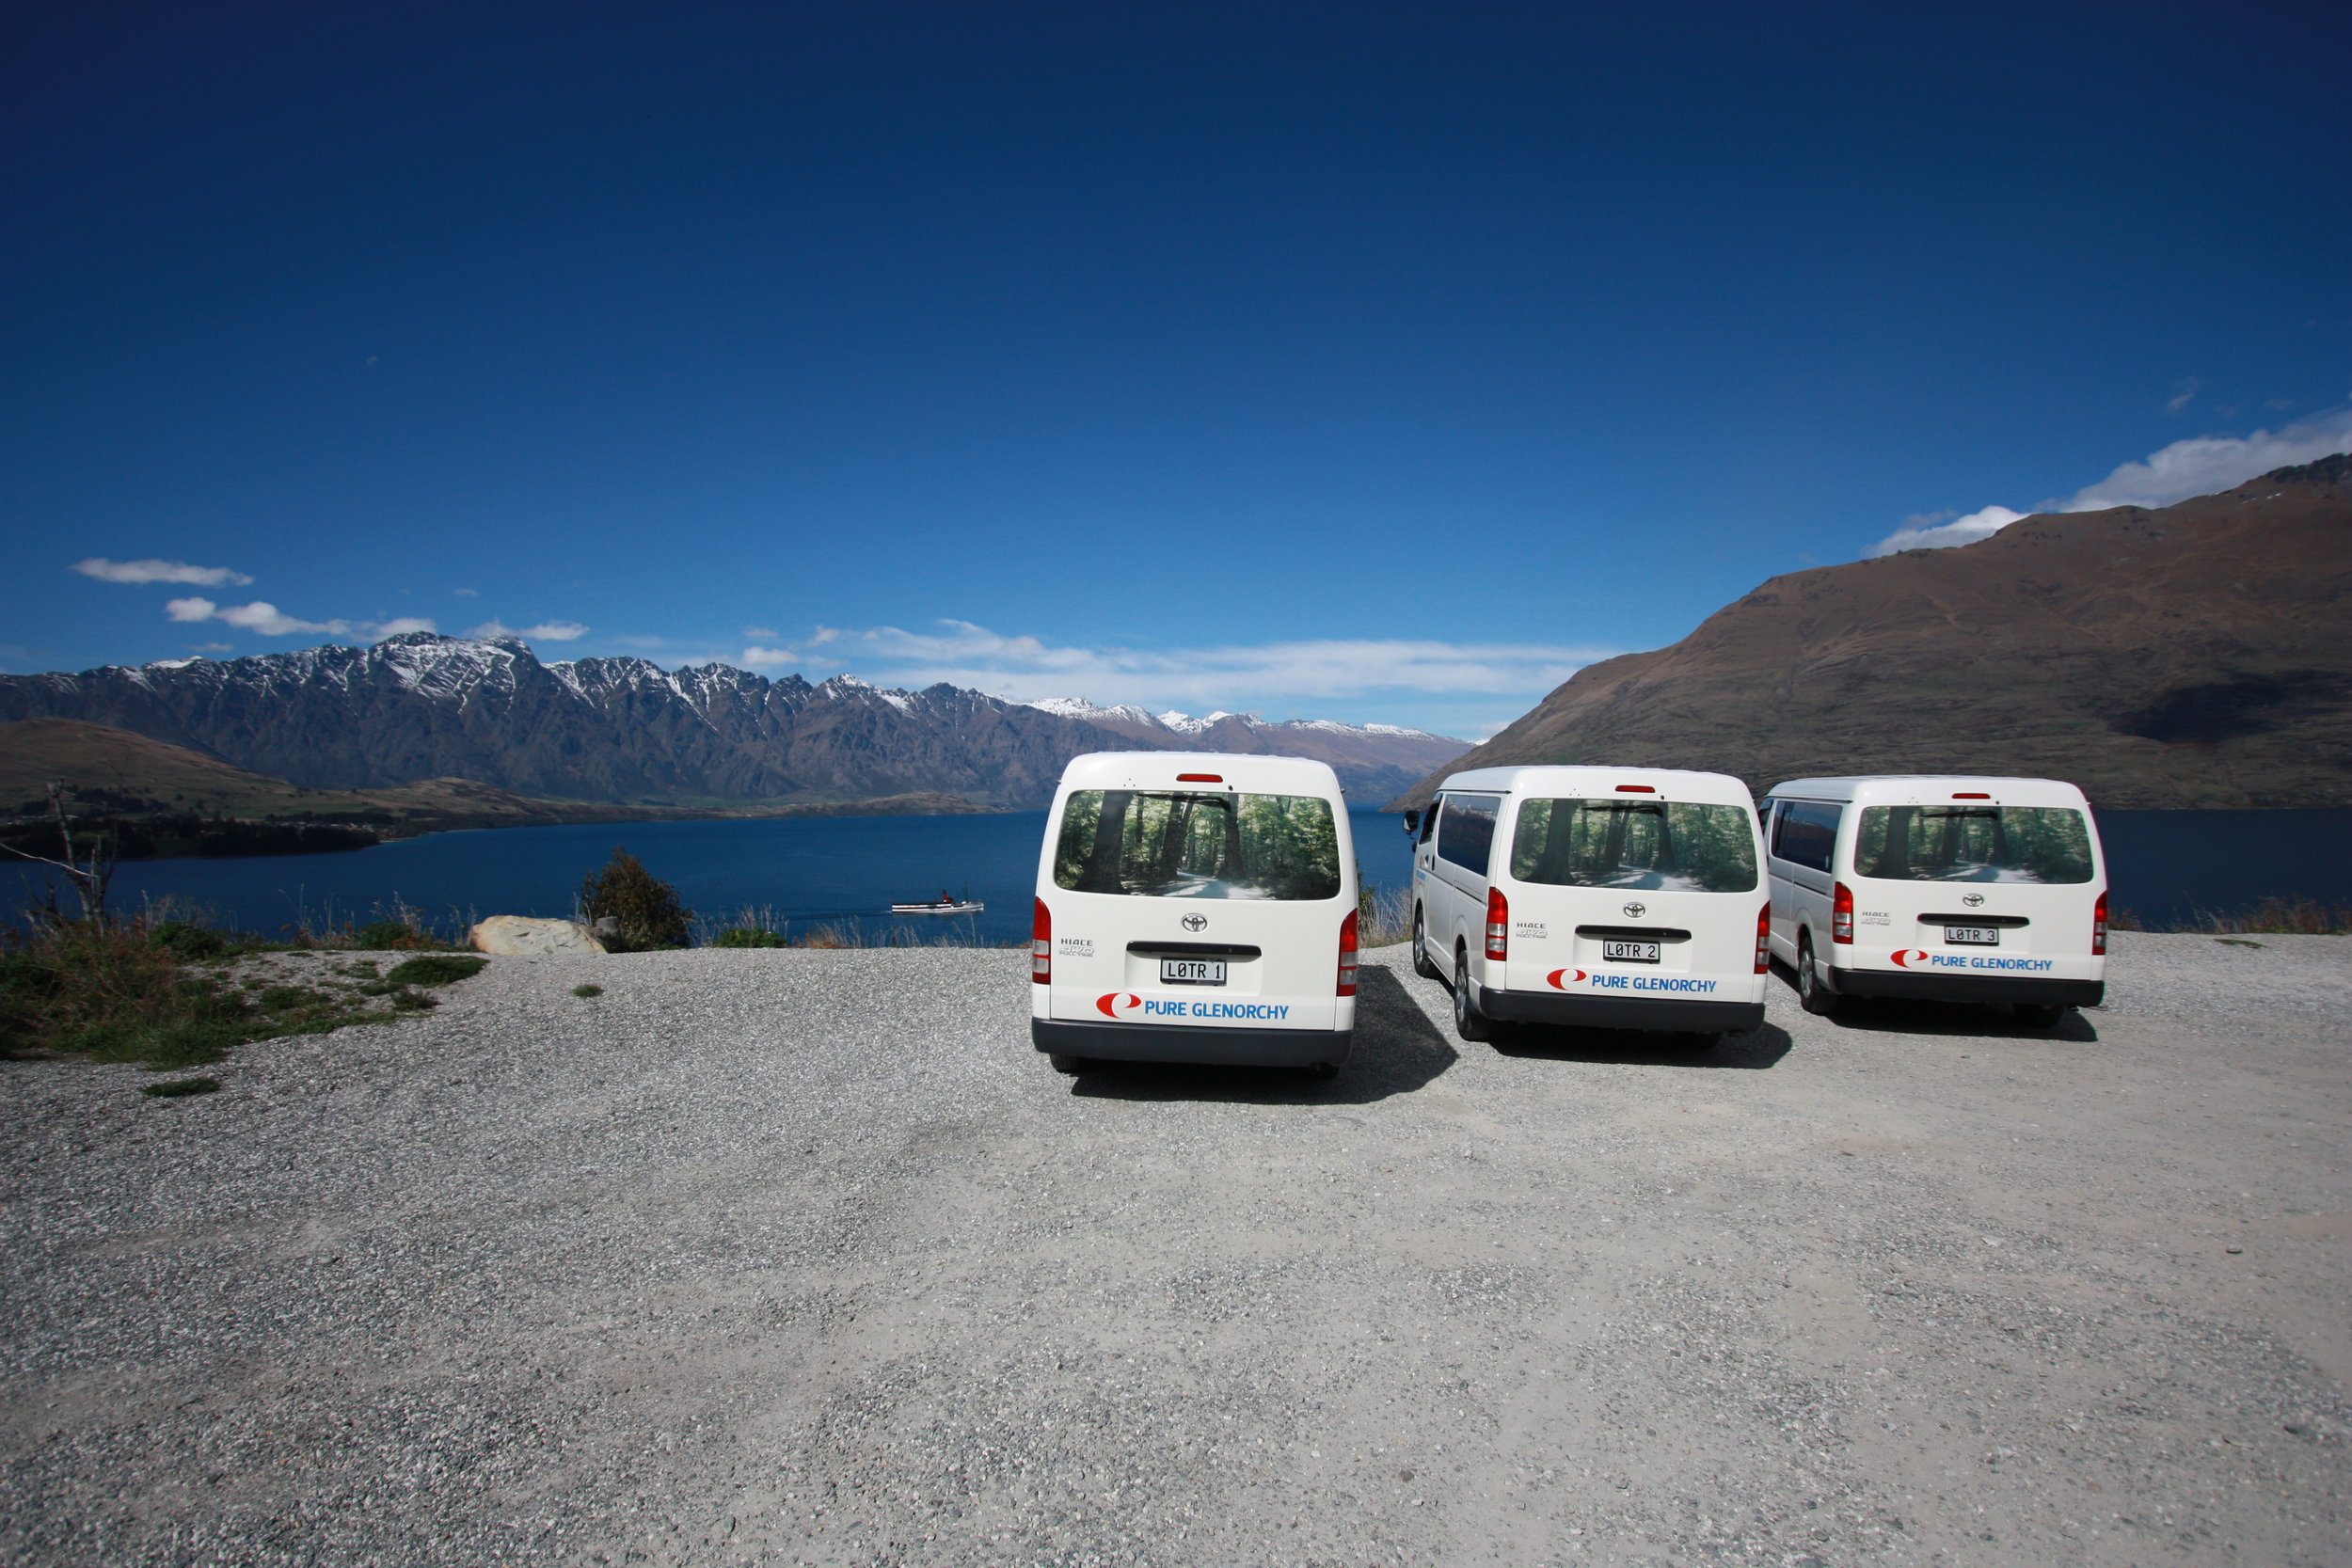 Available for large group tours to Glenorchy, Paradise and Mt Aspiring.JPG